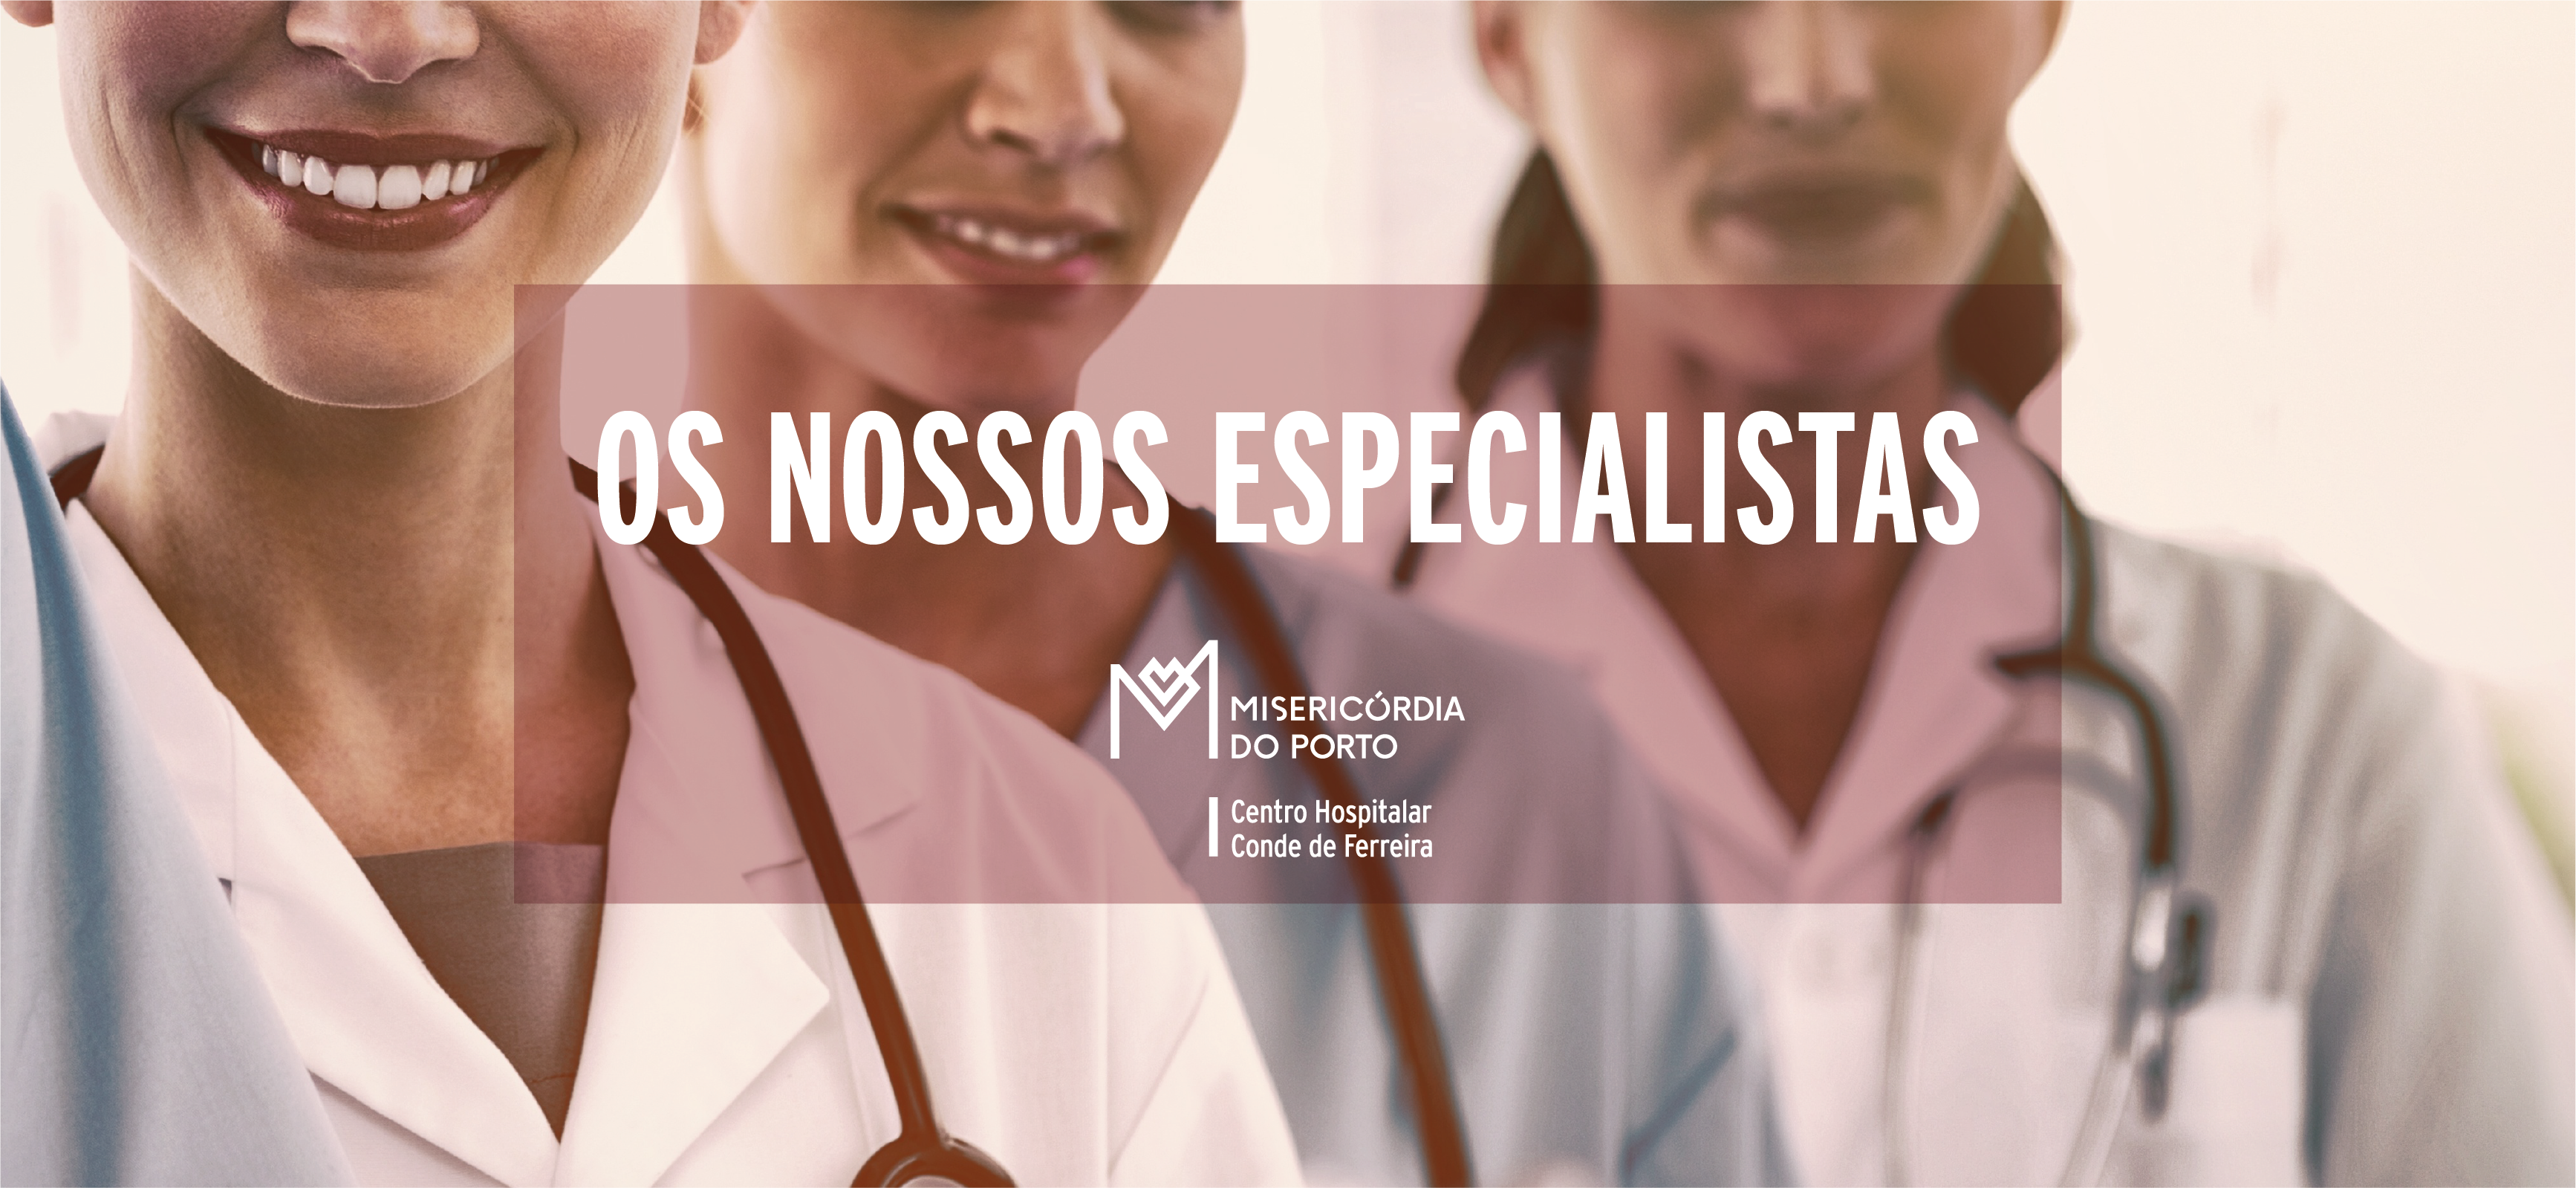 https://portaldasaude.scmp.pt/assets/misc/img/corpo_clinico/Template%20Geral%20CHCF/Mulher%20CHCF%20corpo%20cl%C3%ADnico.png